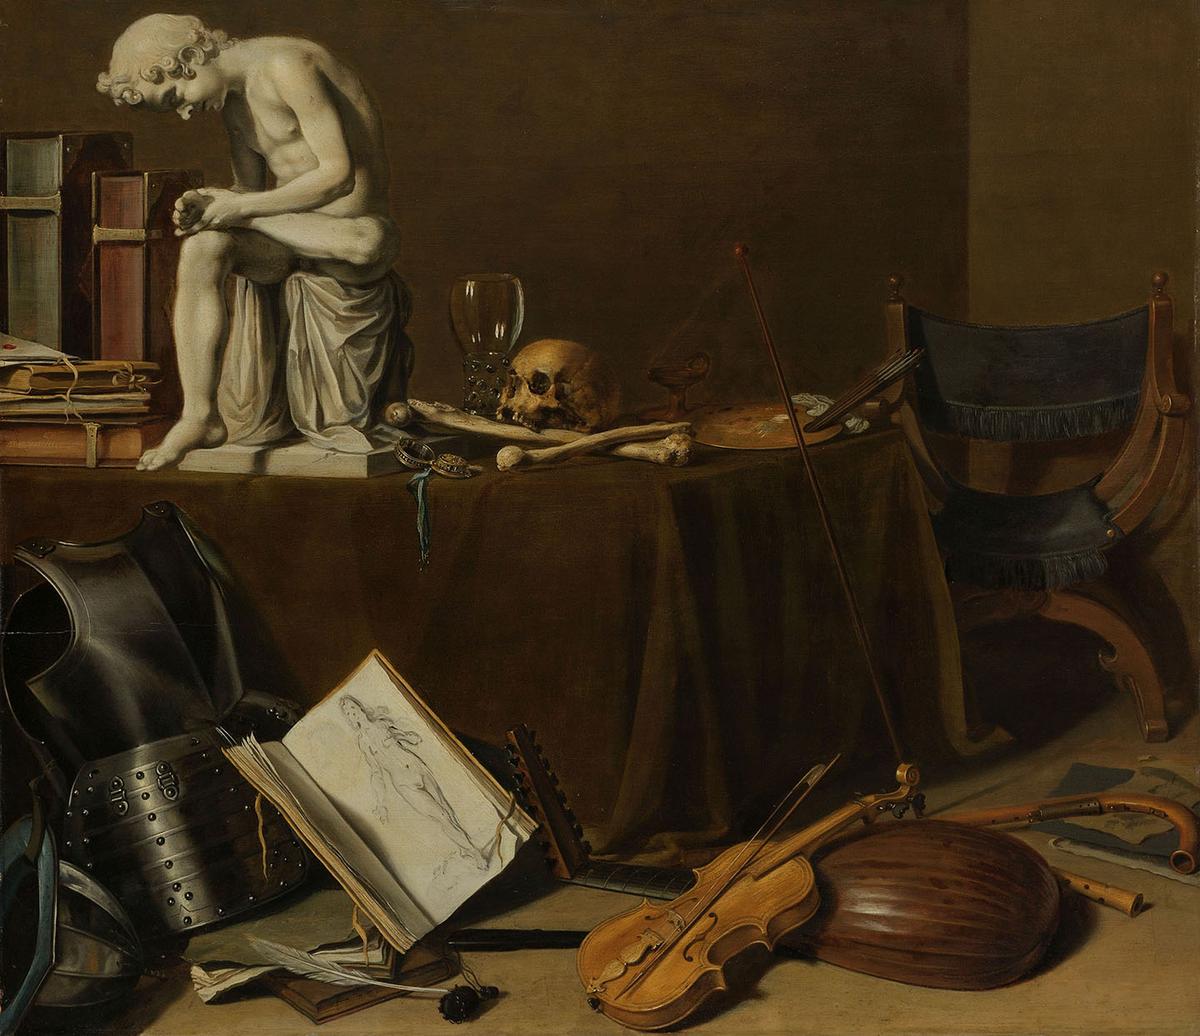 "Vanitas Still Life With the Spinario," 1628, by Pieter Claesz. Oil on panel; 27 1/2 inches by 31 1/4 inches. Rijksmuseum, Amsterdam. (Public Domain)